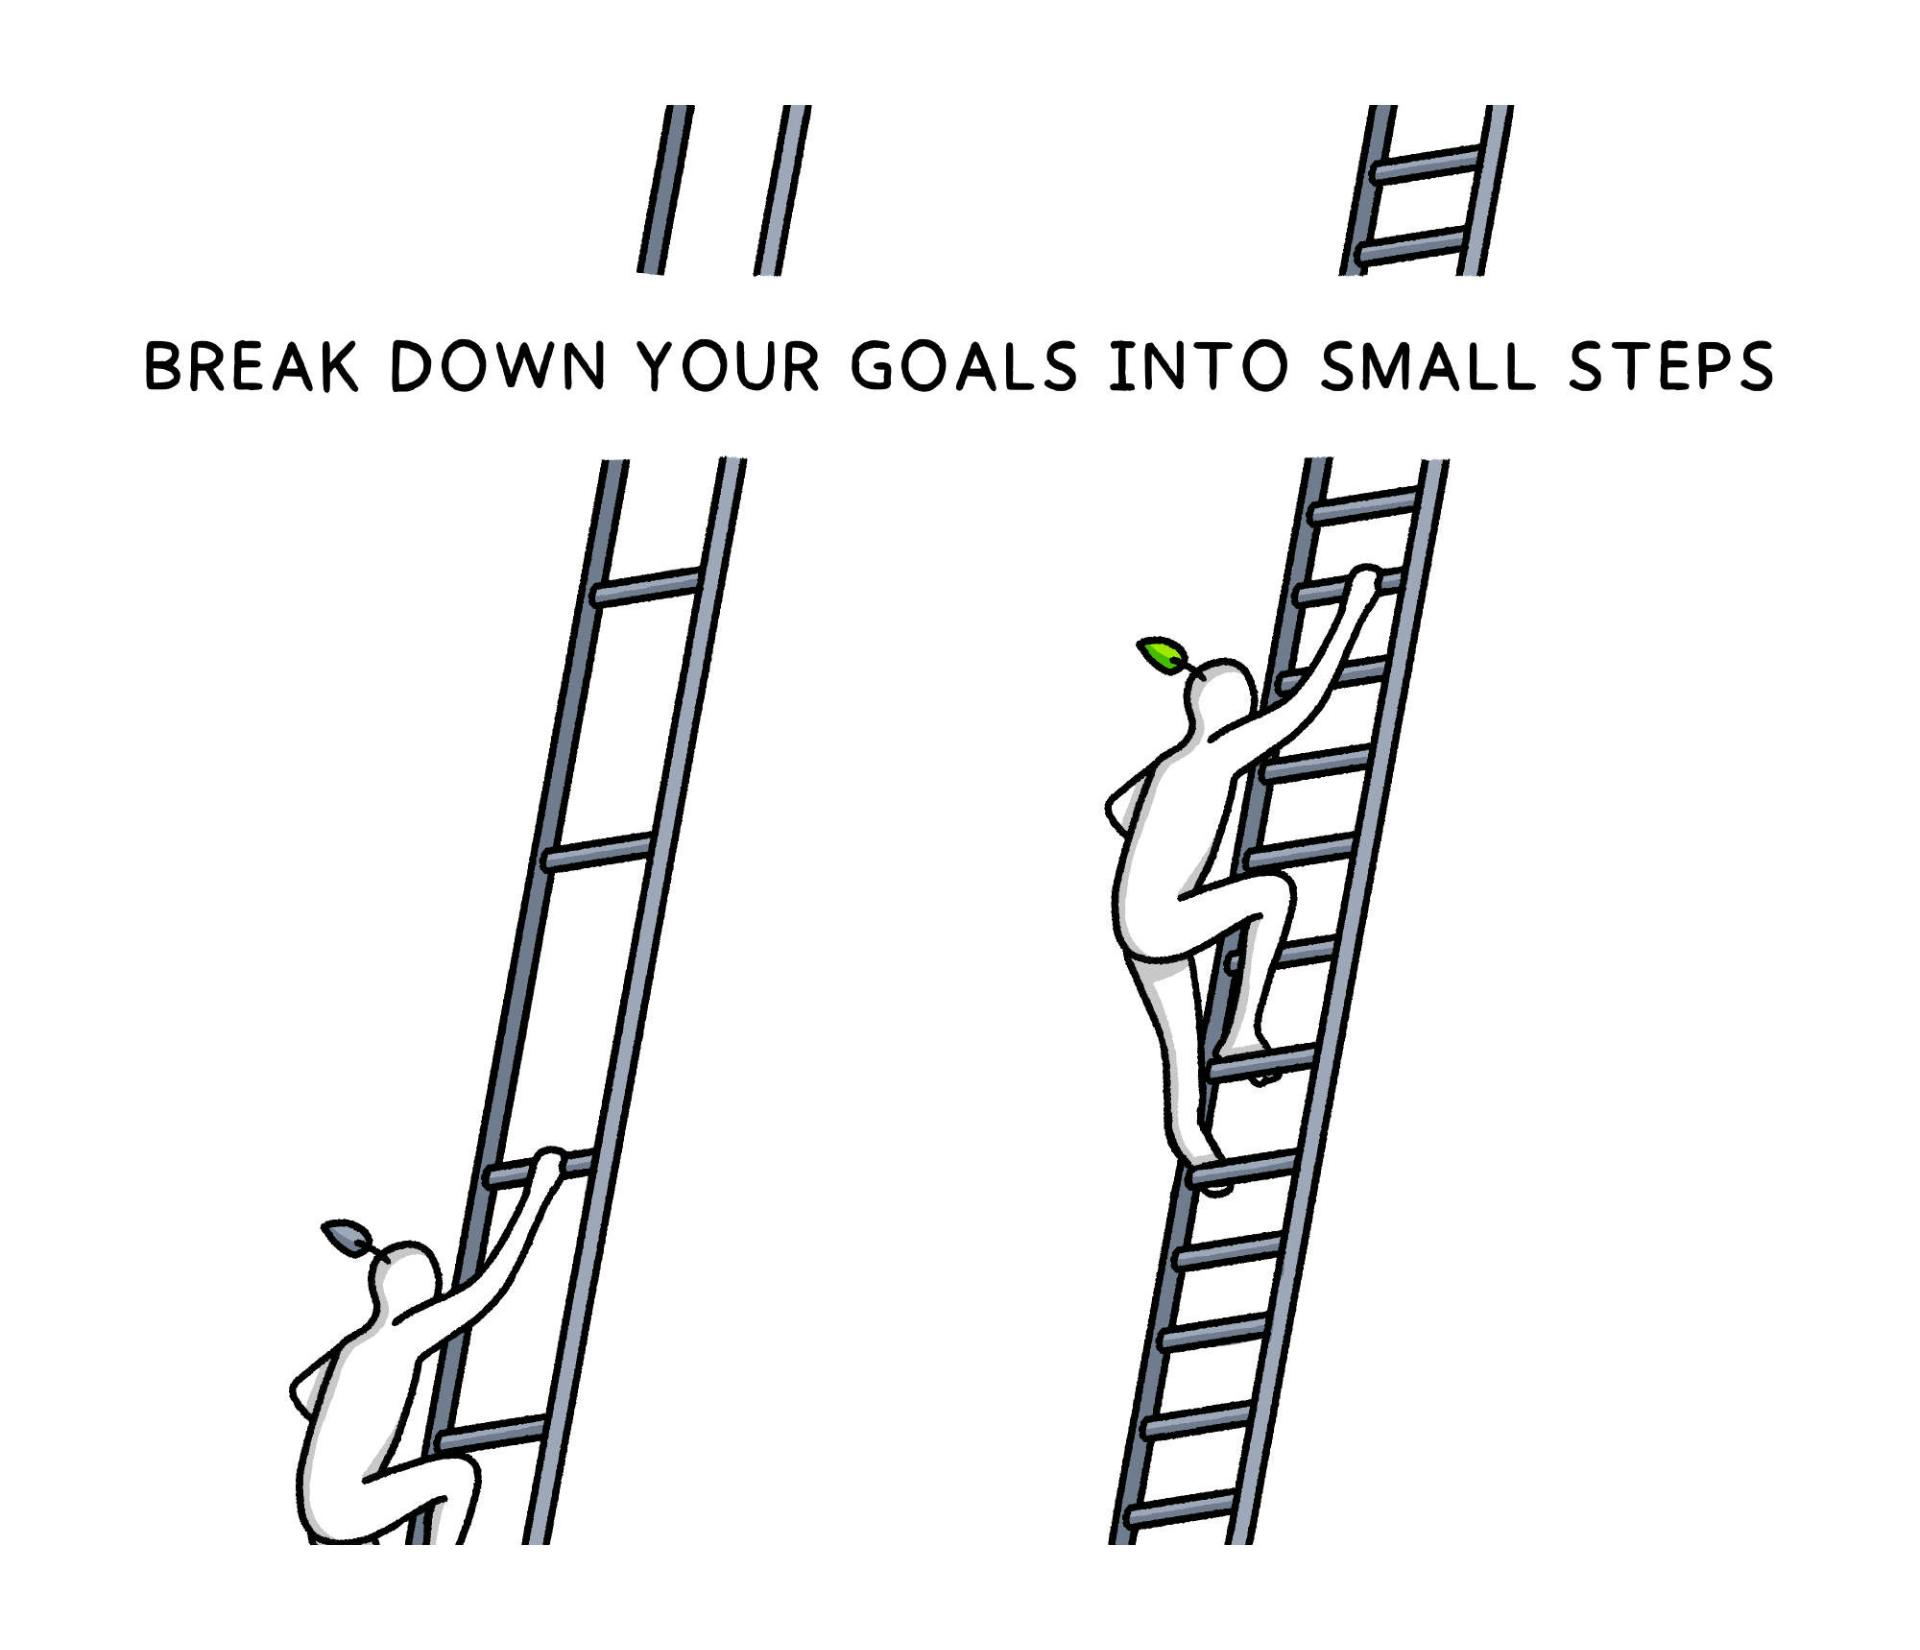 Break down your goals into small steps, with illustrations